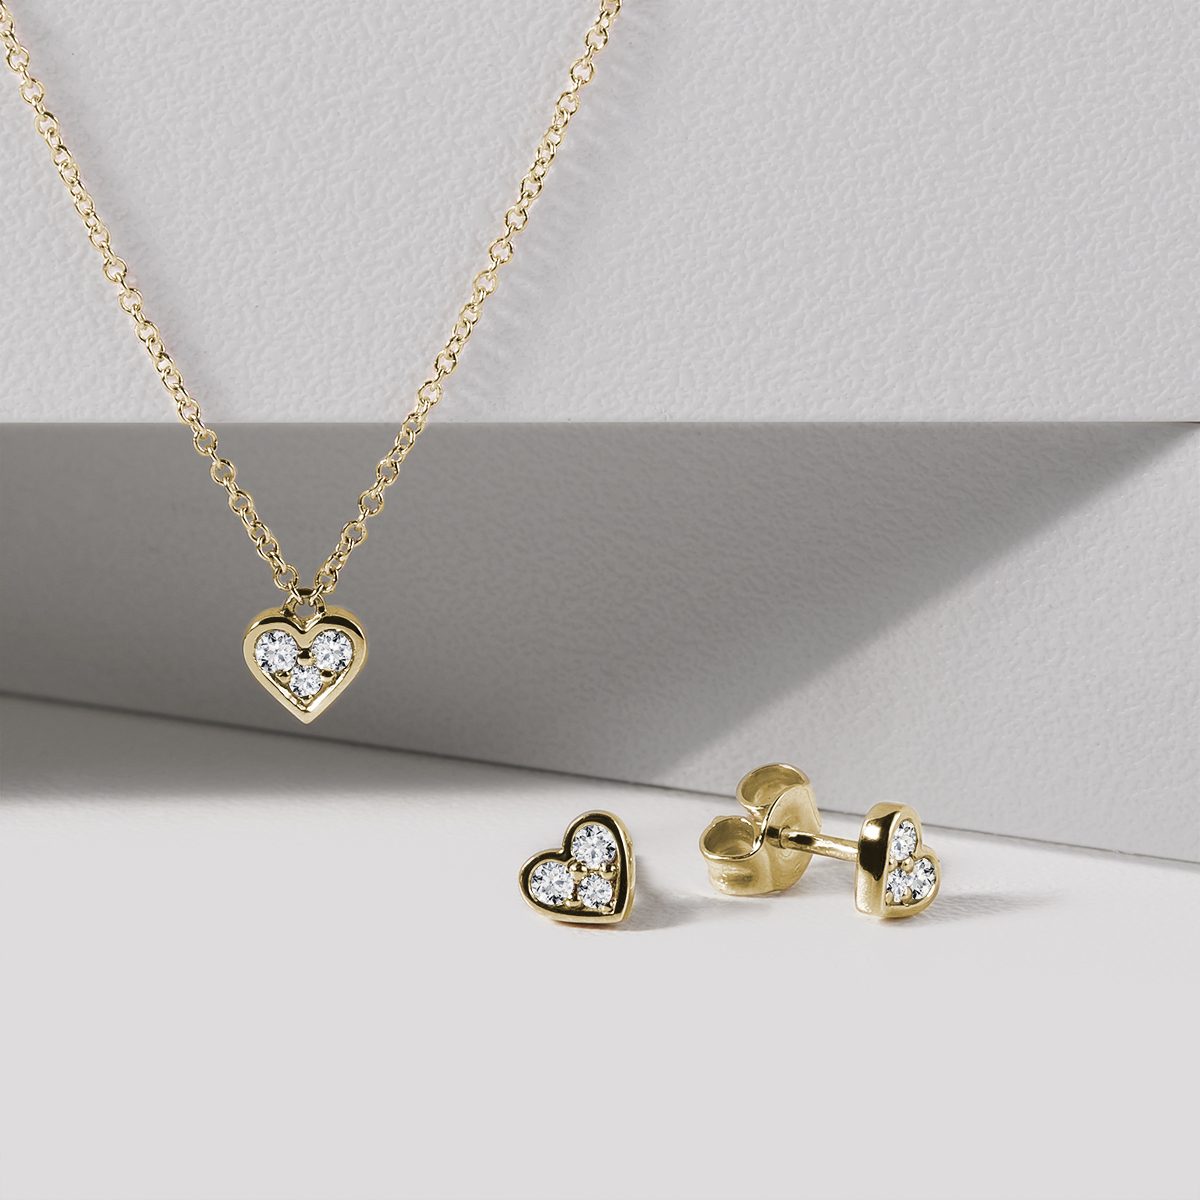 necklace and earrings with diamond heart in yellow 14k gold - KLENOTA